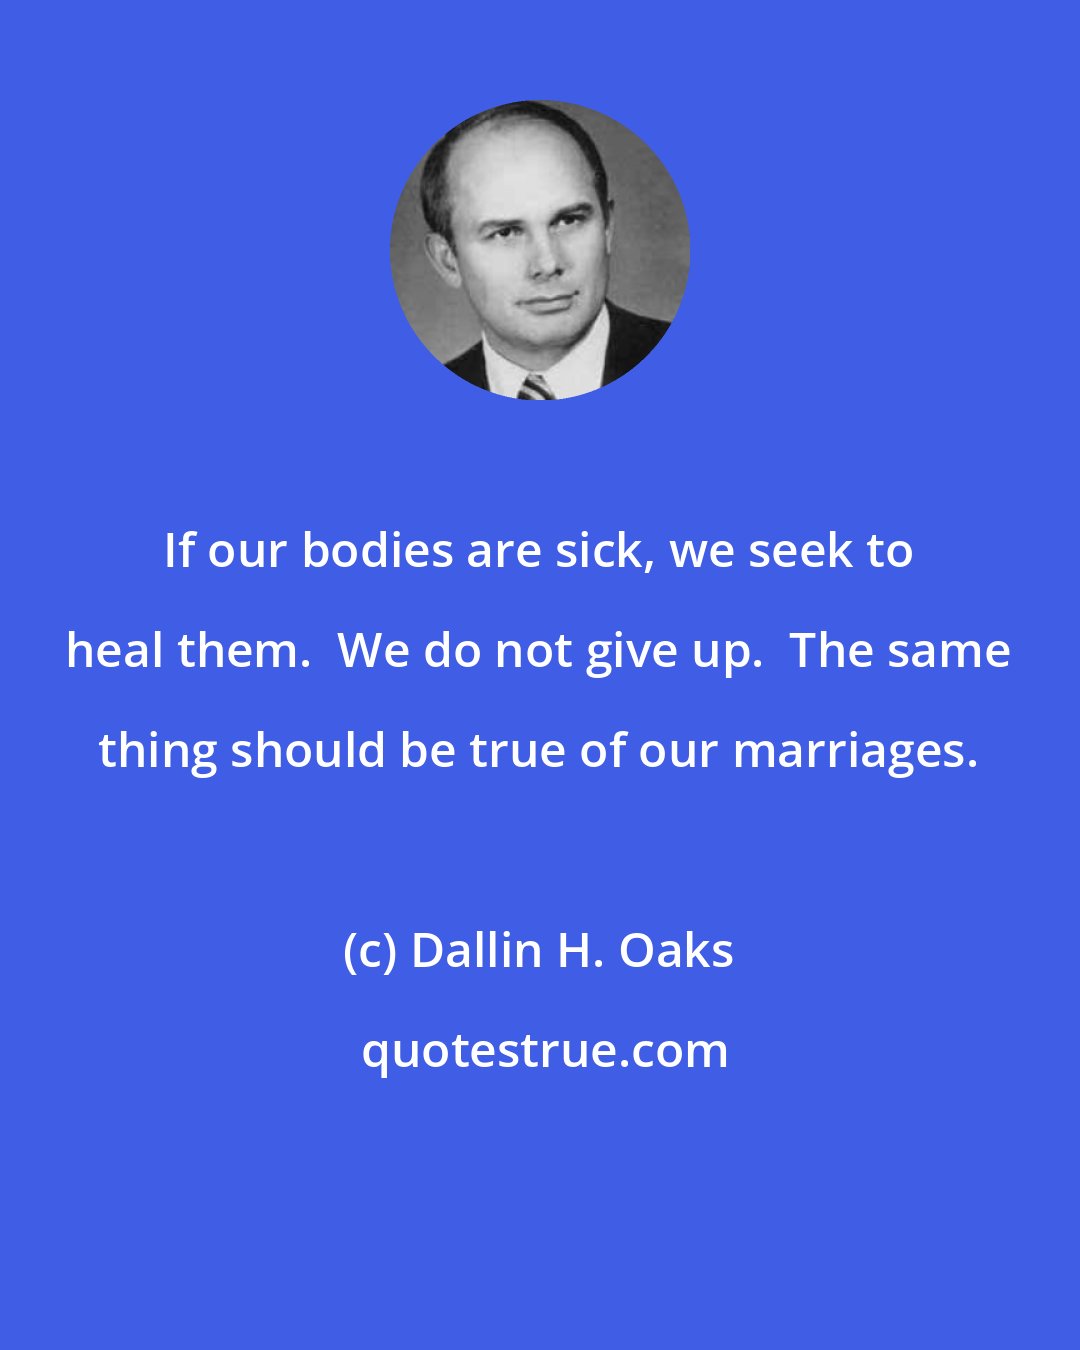 Dallin H. Oaks: If our bodies are sick, we seek to heal them.  We do not give up.  The same thing should be true of our marriages.